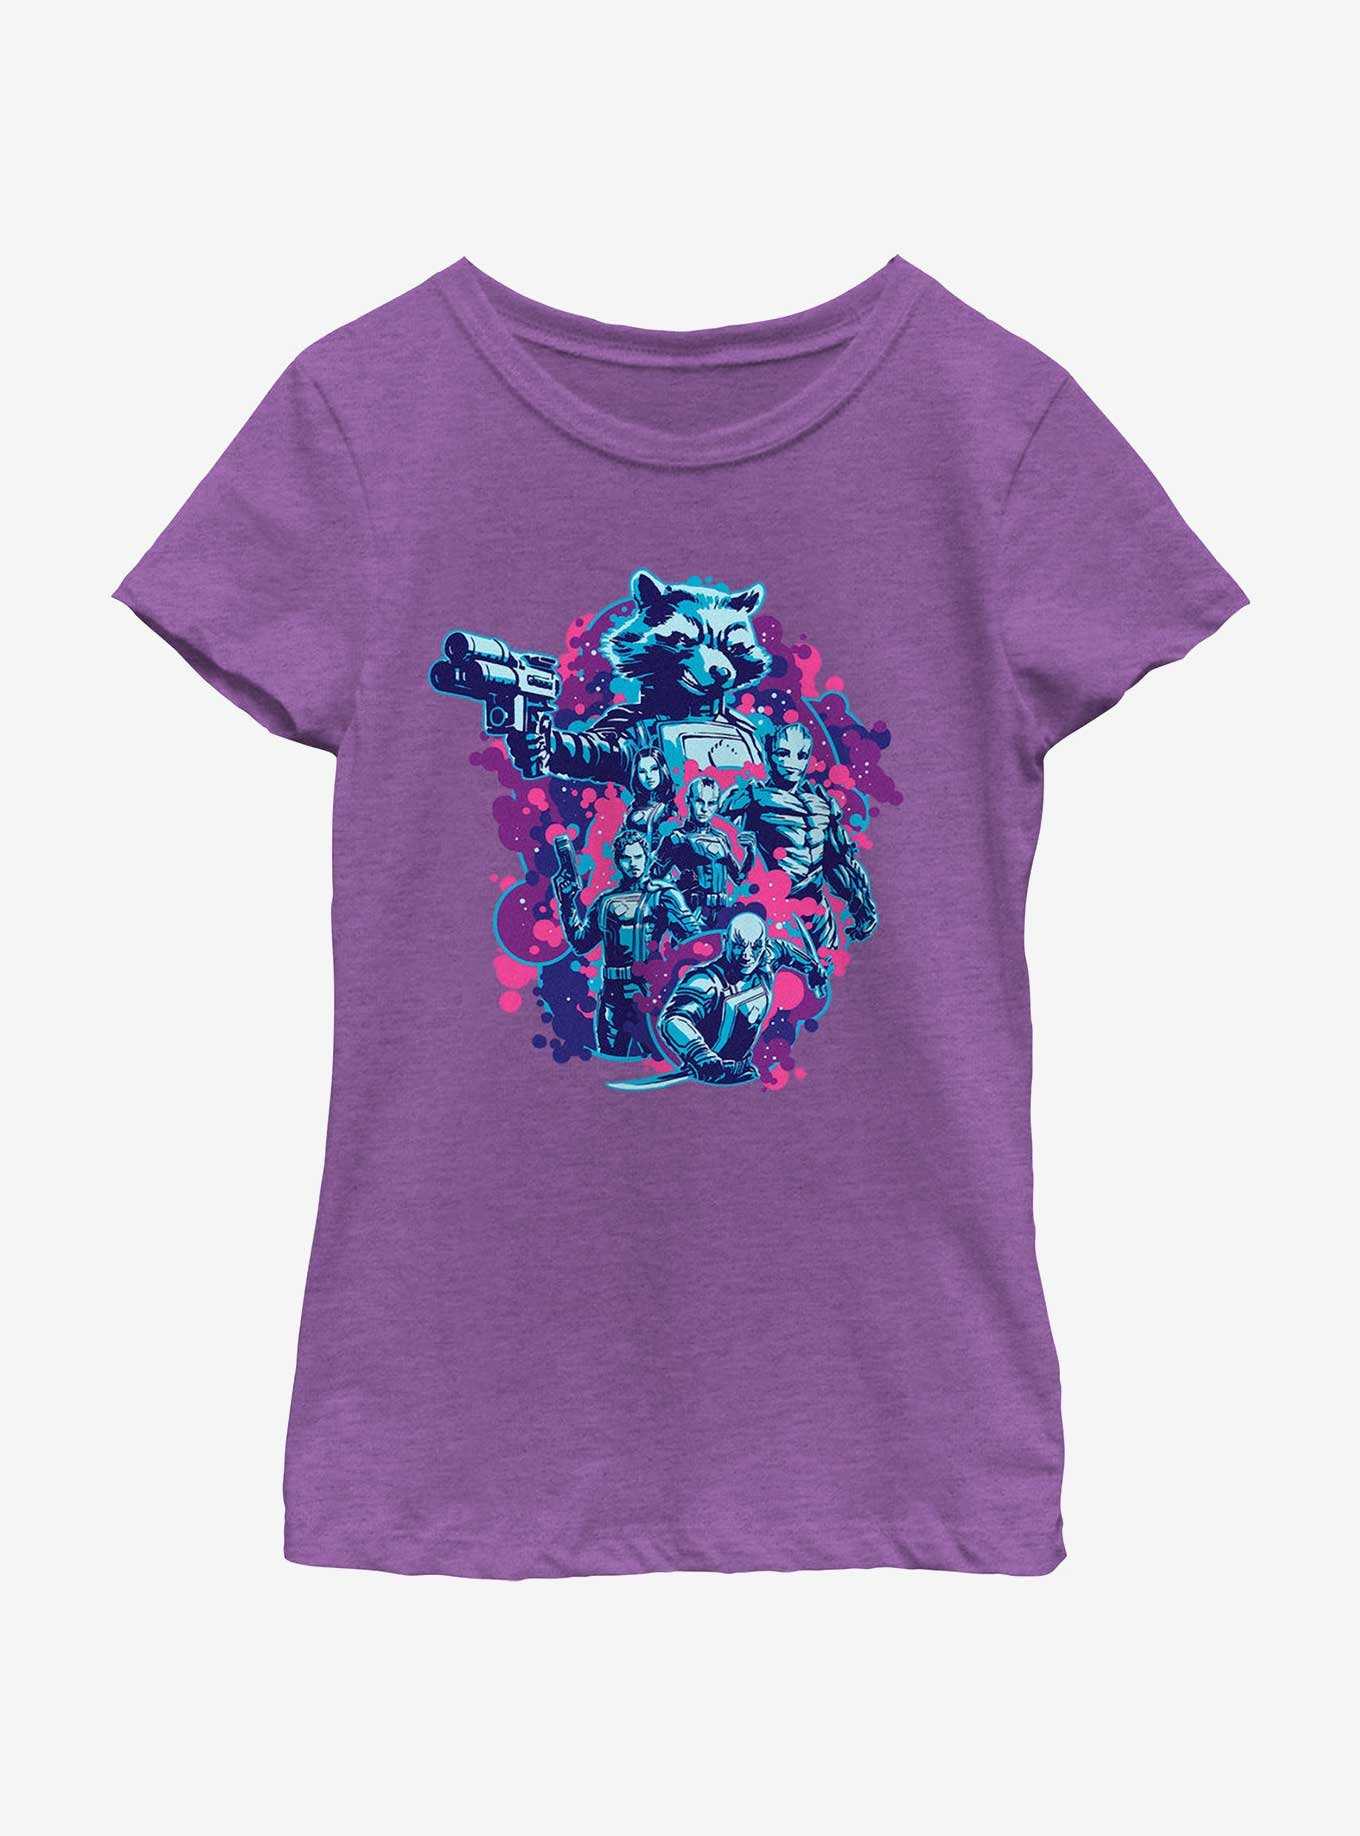 Marvel Guardians of the Galaxy Rocket's Crew Girls Youth T-Shirt, , hi-res